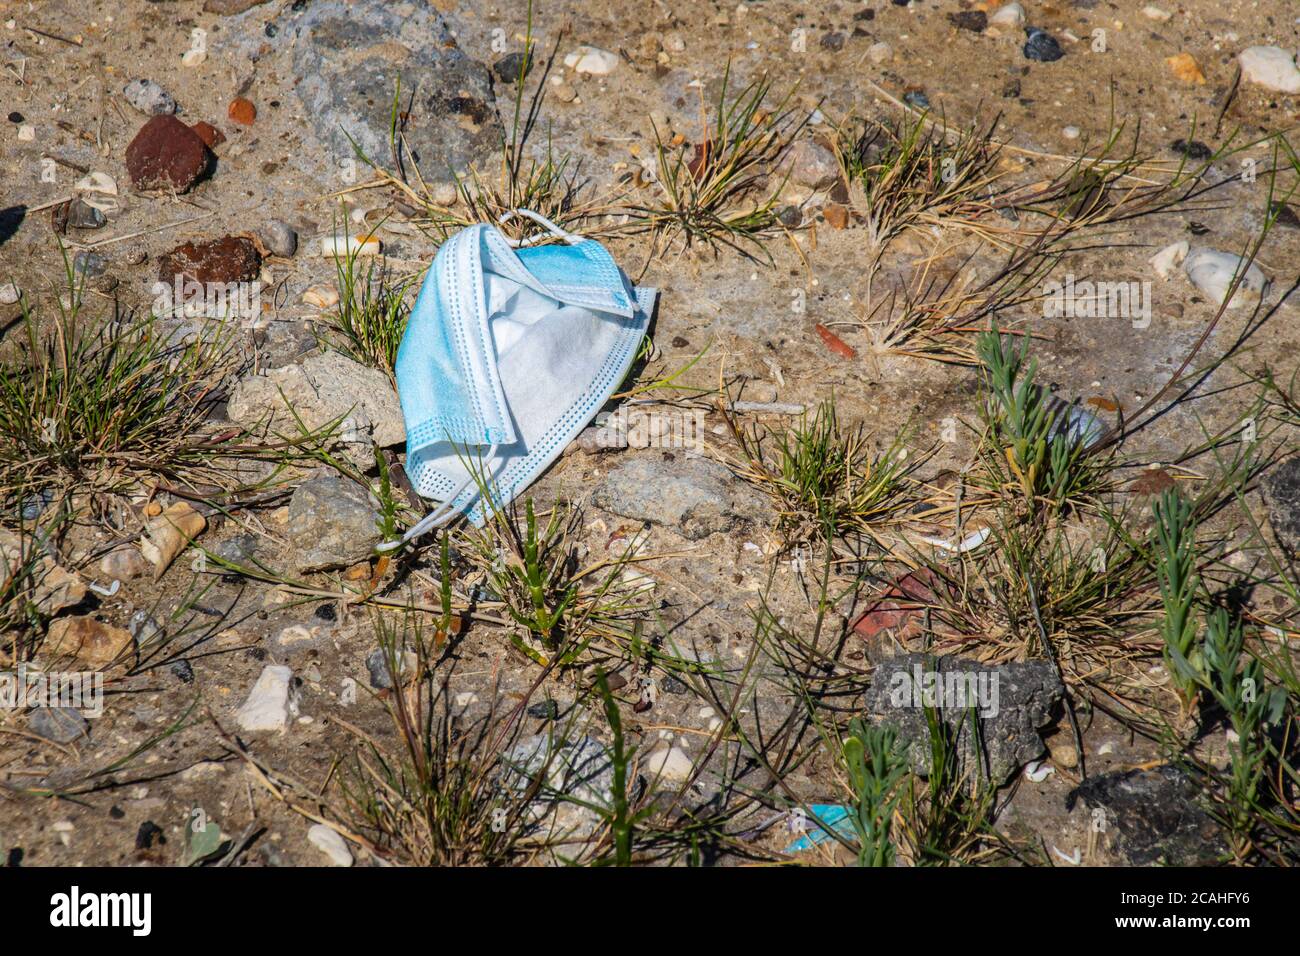 Used mask thrown into the wild. Pollution Stock Photo